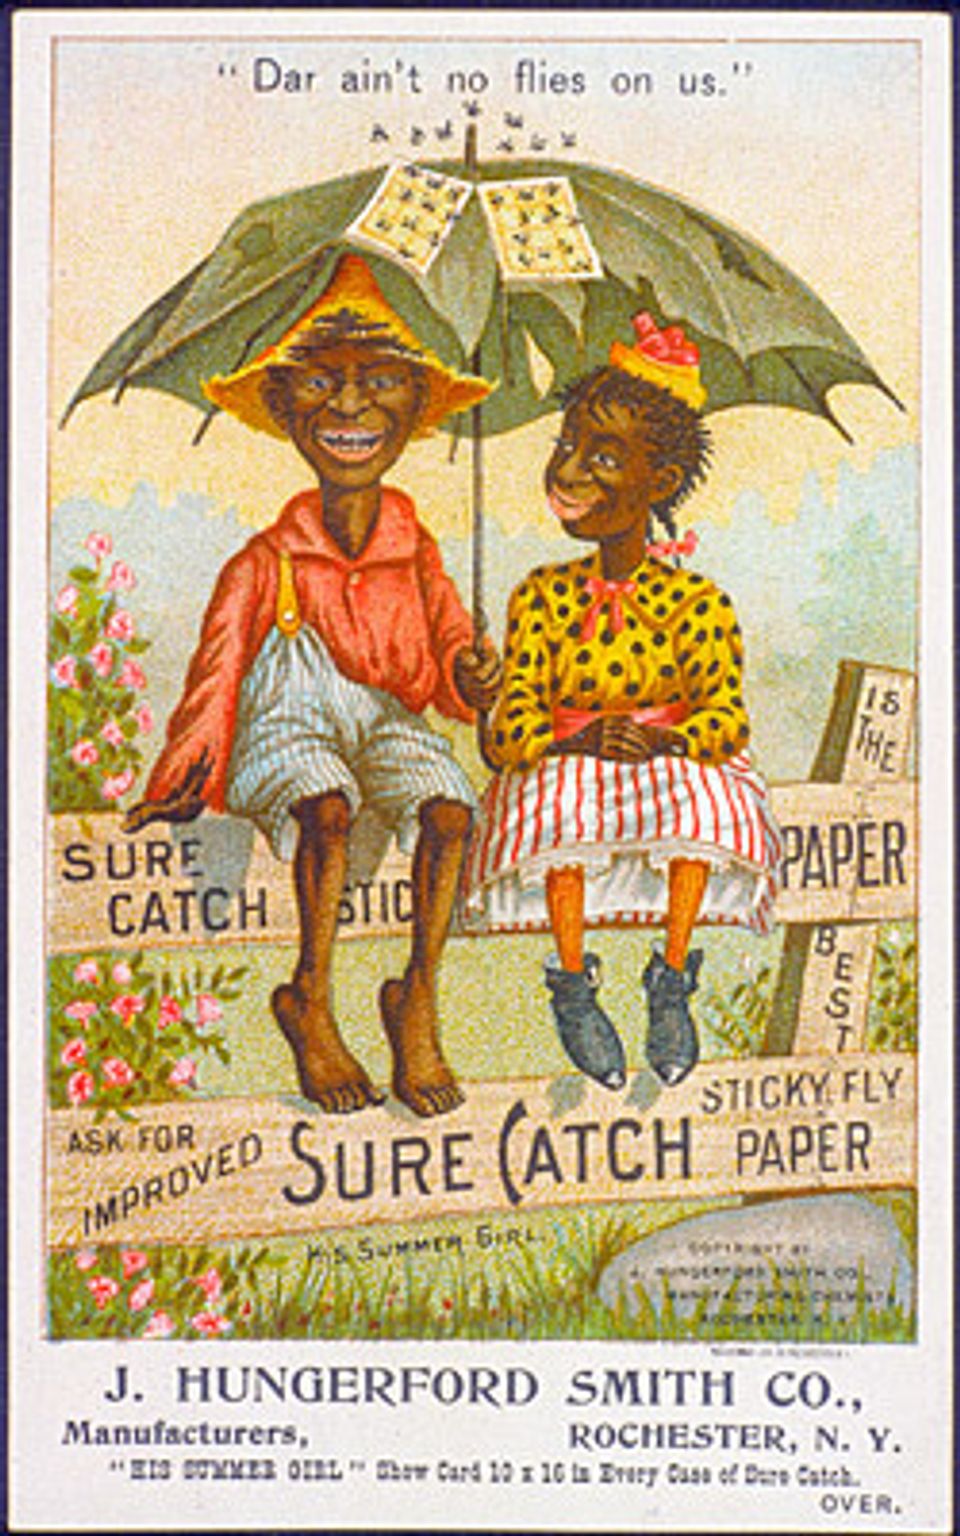 "Dar ain’t no flies on us," advertising card, no date. Division of Politics and Reform, National Museum of American History, Smithsonian Institution